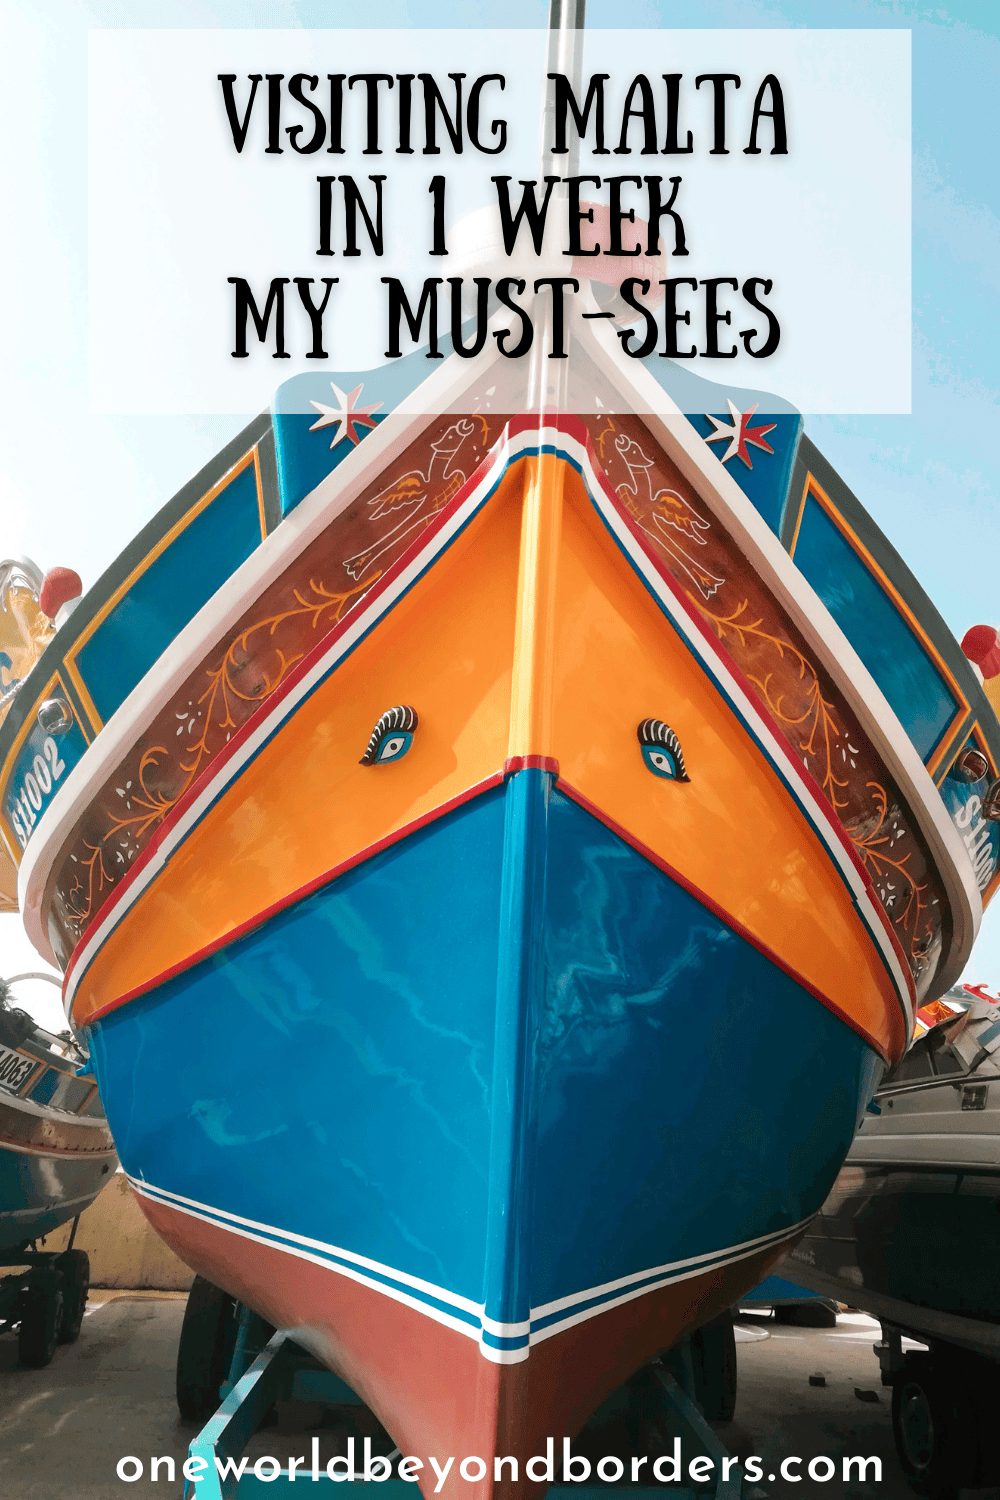 Visiting Malta in one week - My must-sees - Pinterest pin